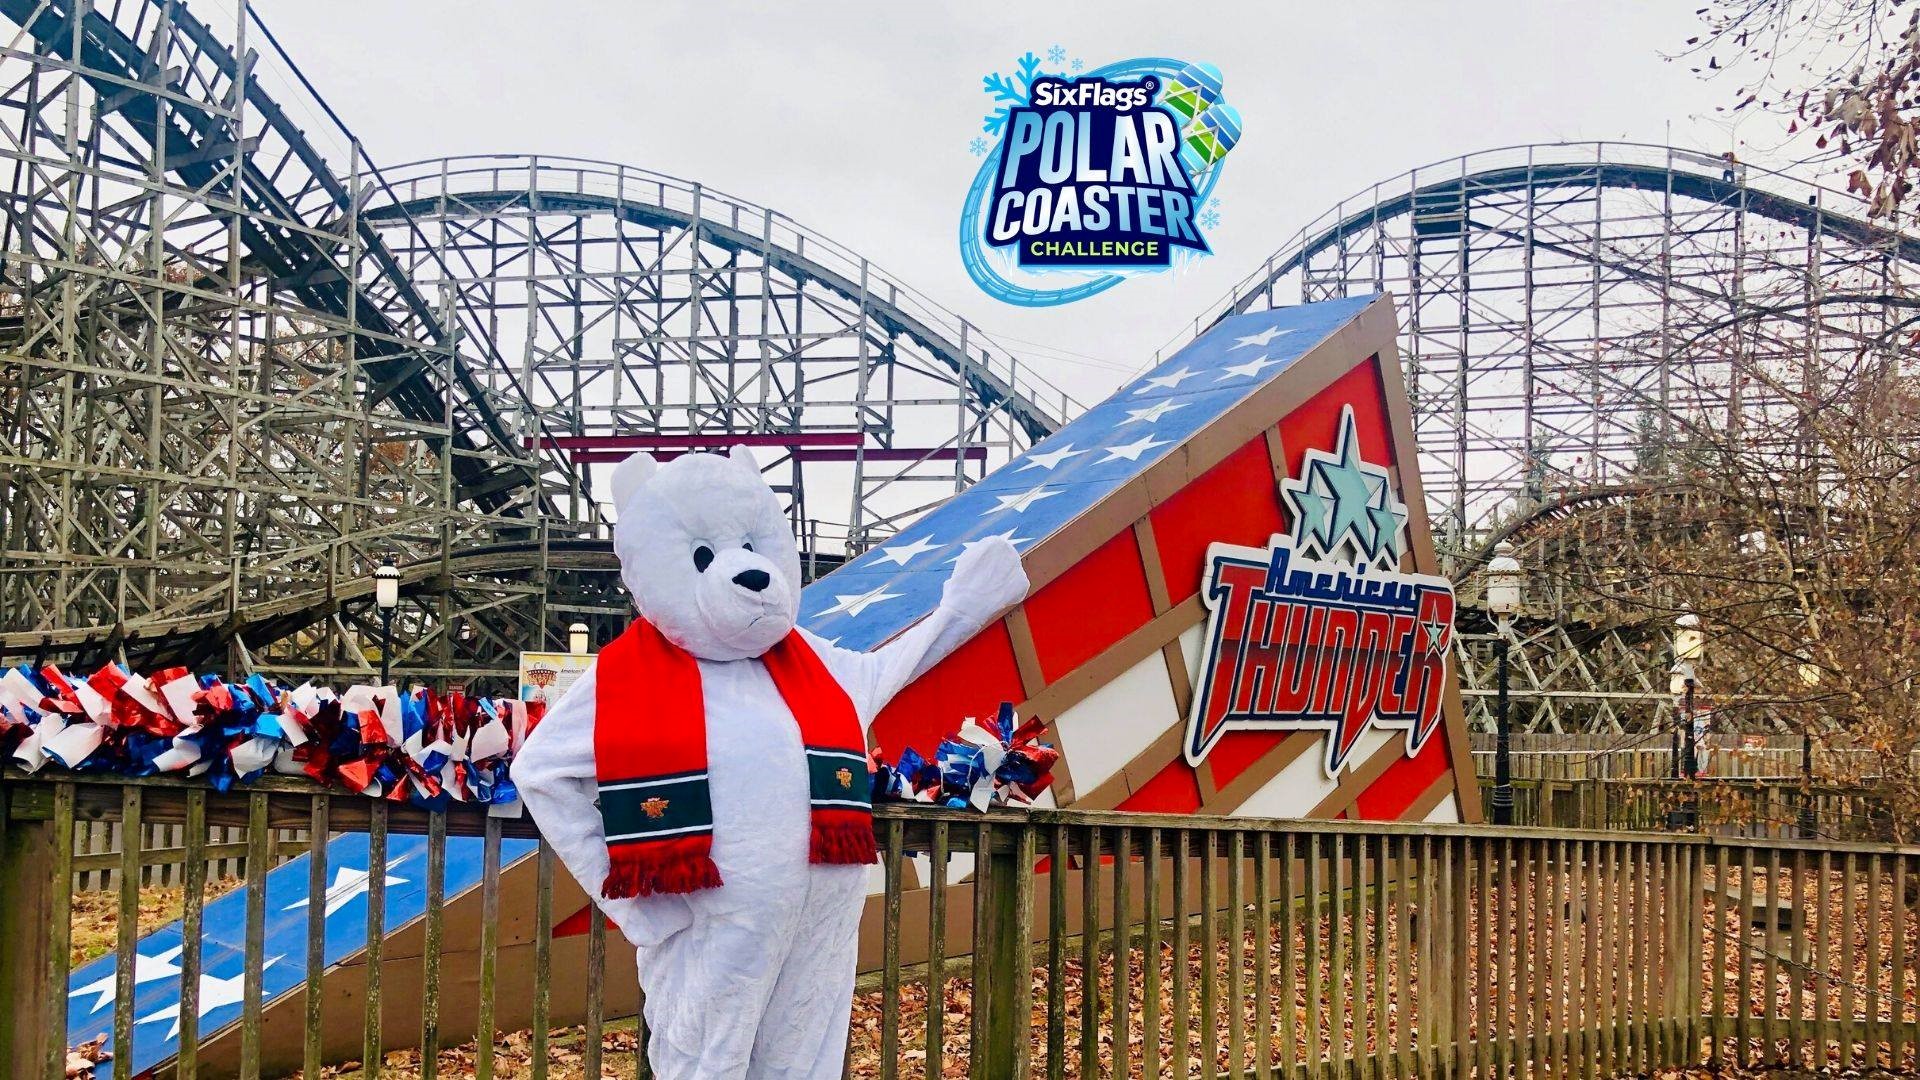 Six Flags St Louis Hosts Polar Coaster Challenge This Saturday